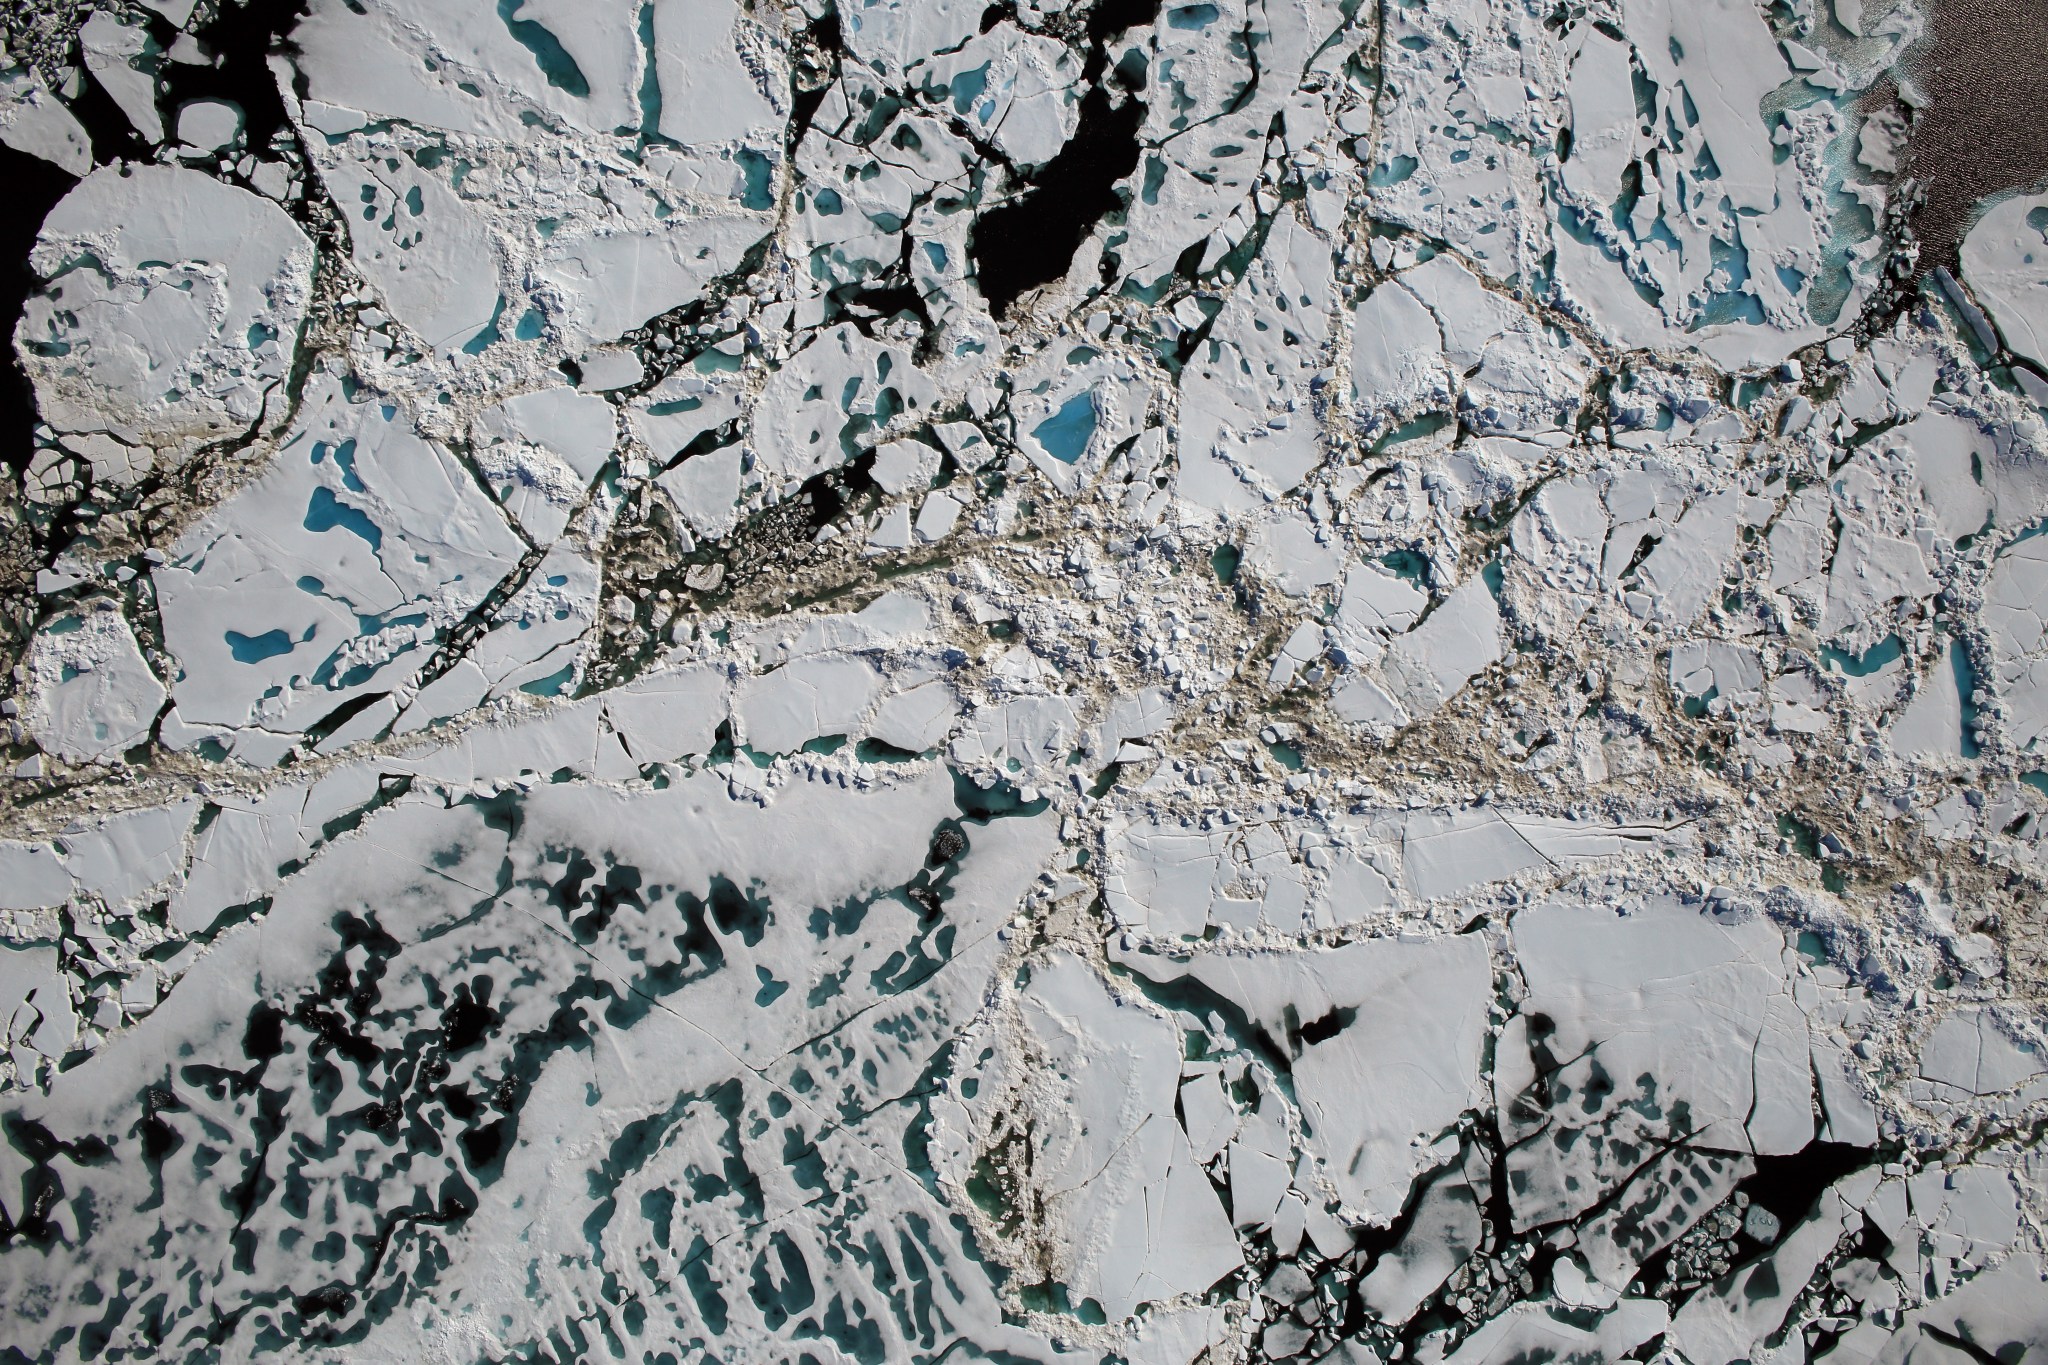 overhead view of sea ice showing brown sediments